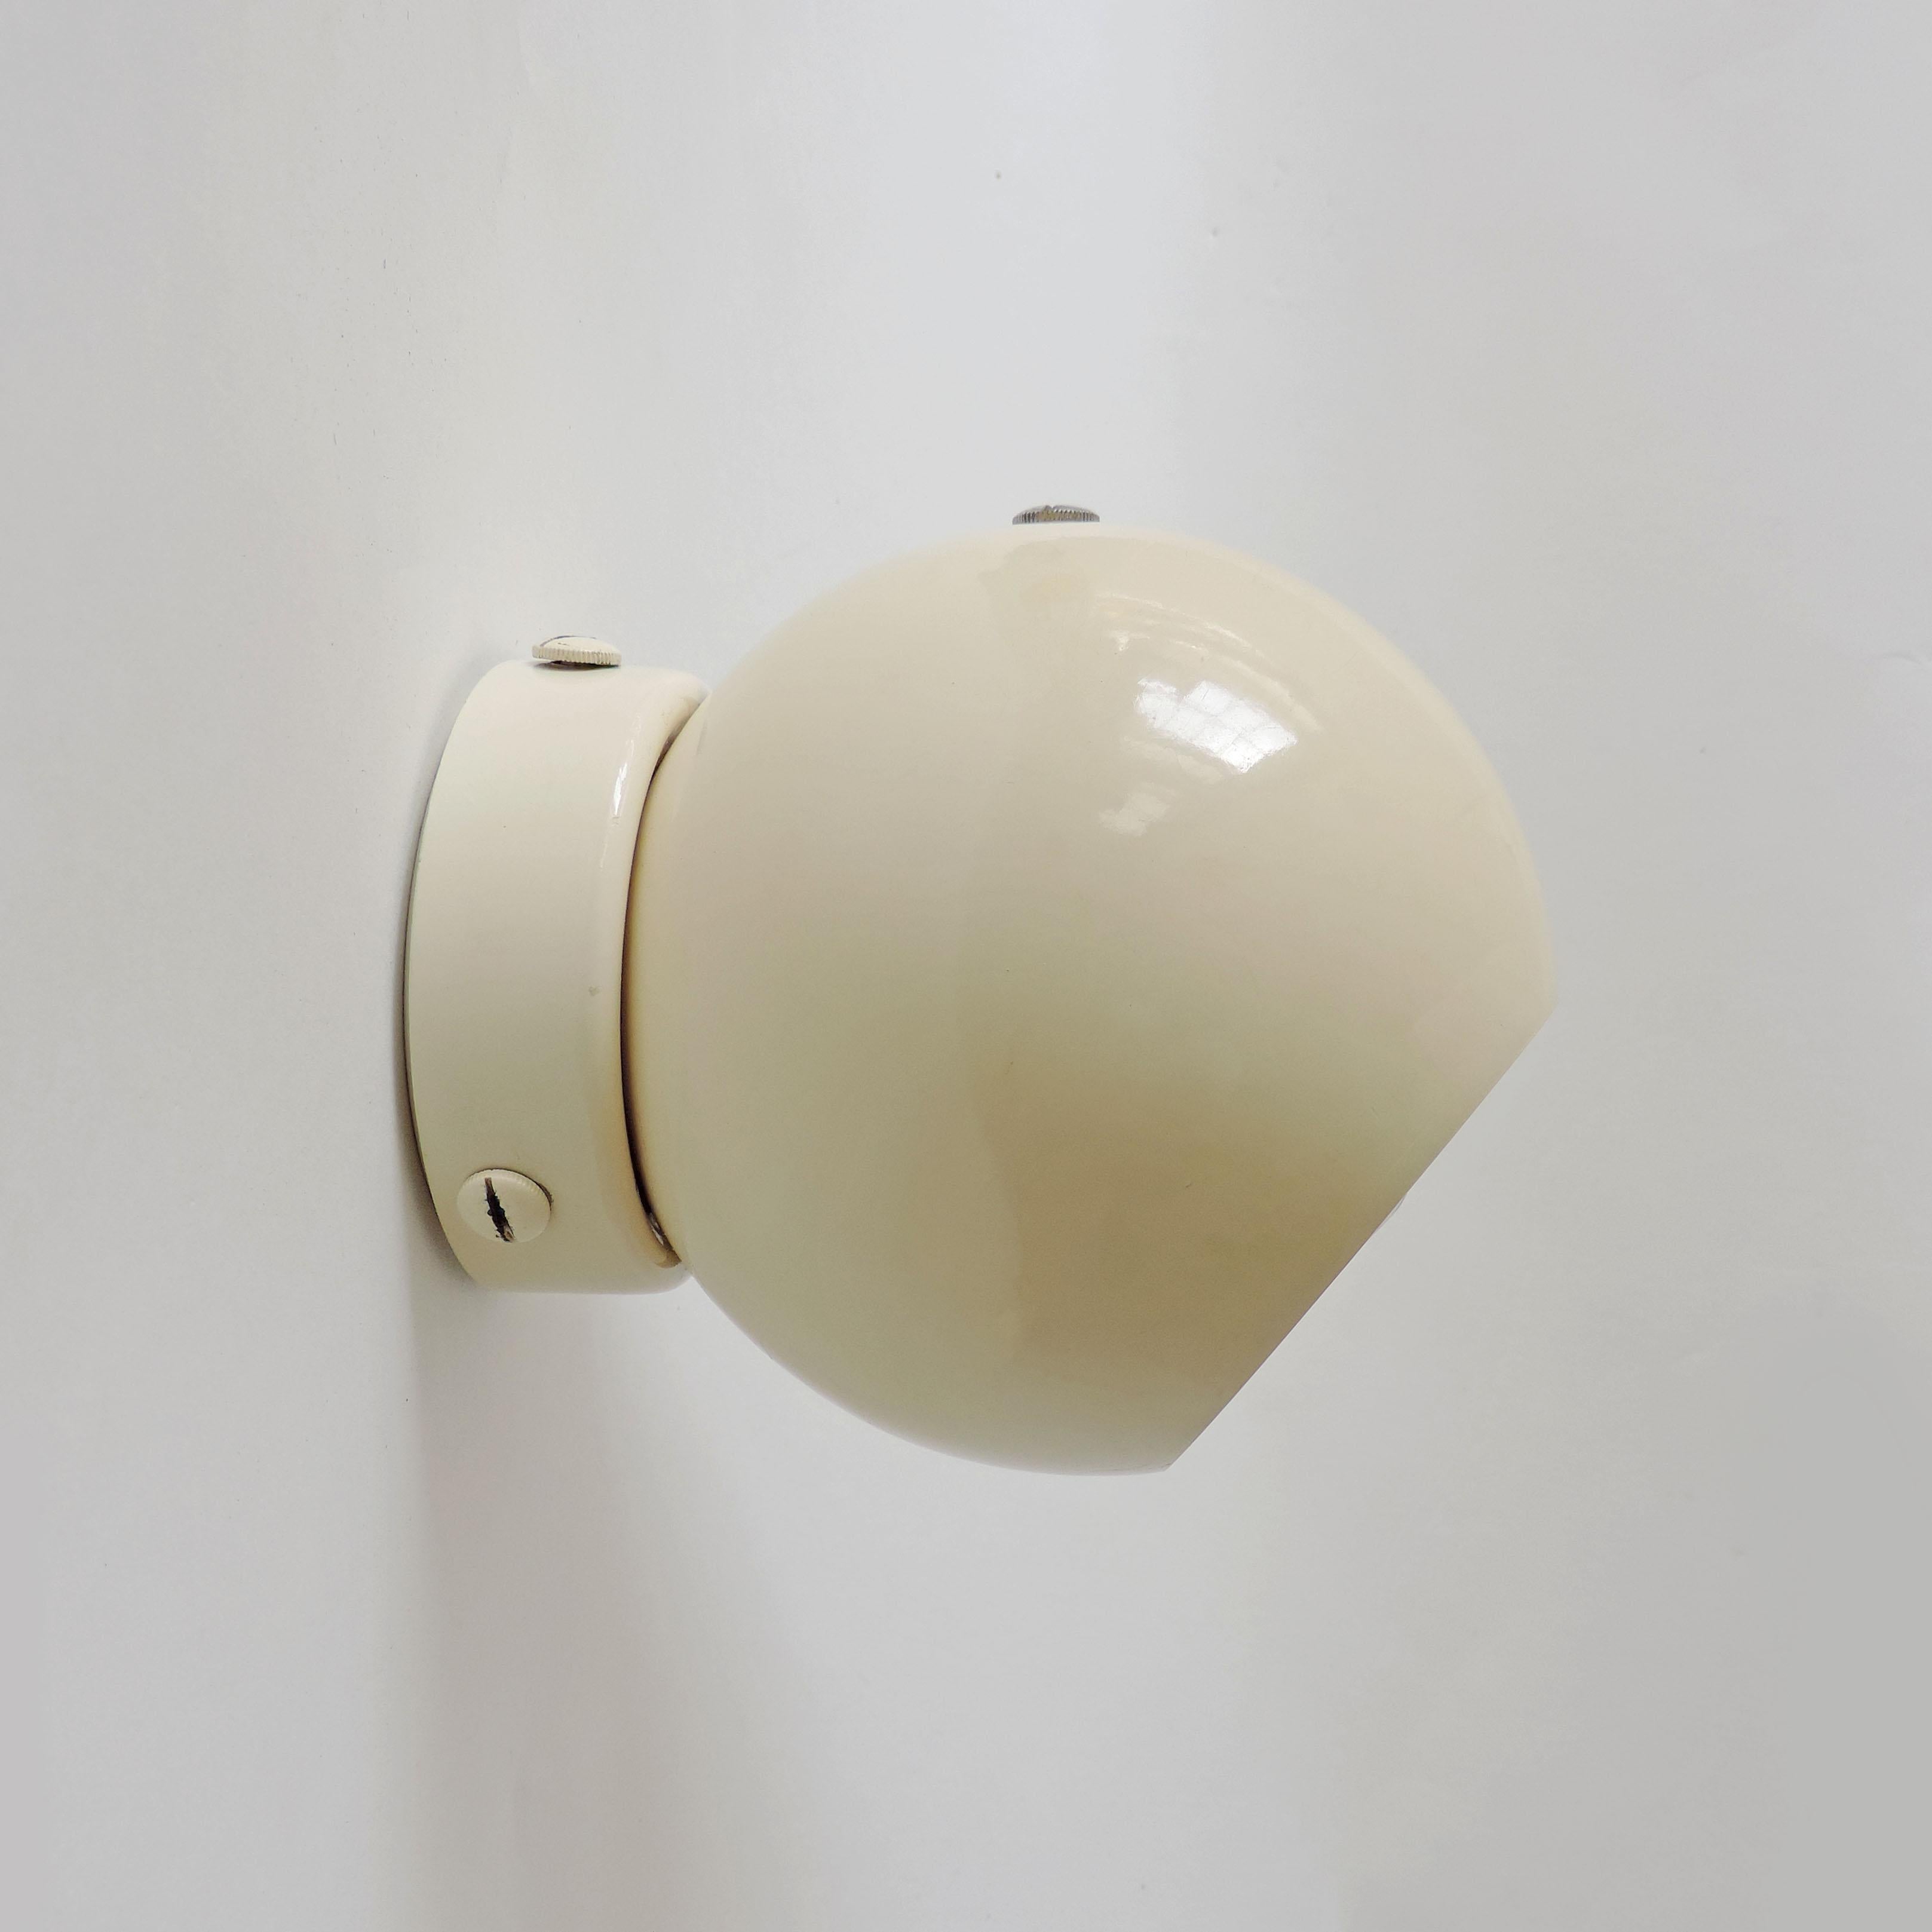 Pair of Gino Sarfatti model 586/s adjustable wall lamps in Cream, Italy, 1962
Original Arteluce labels.
REF: Gino Sarfatti: Selected Works 1938-1973, Romanelli and Severi, pg. 488.